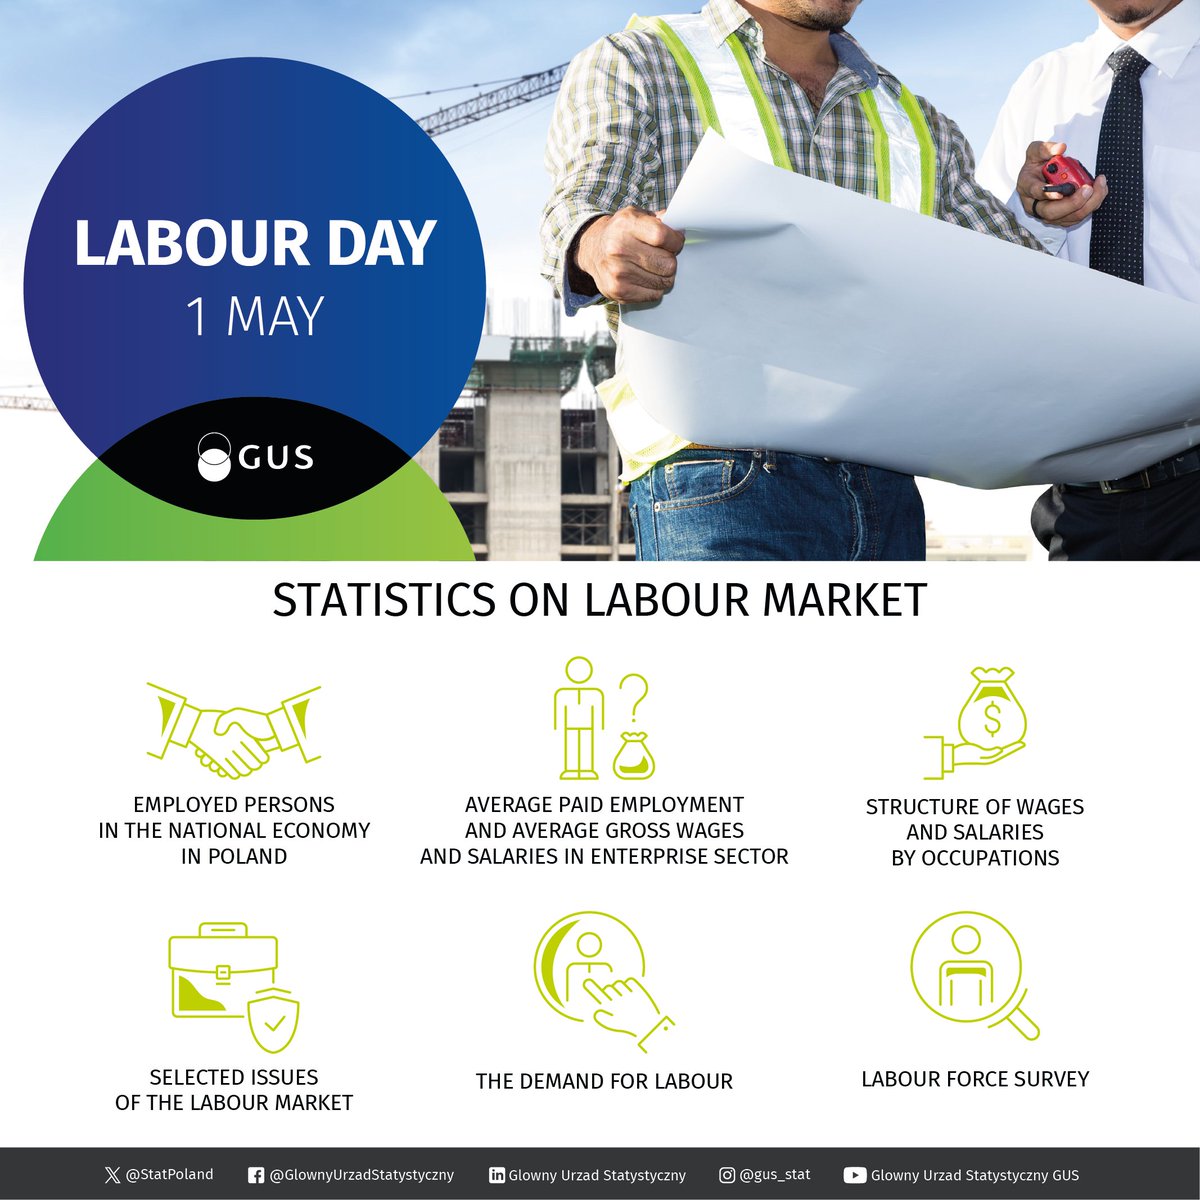 On the occasion of #1May, we present selected publications available in the #LabourMarket section on the #StatisticsPoland website. We also encourage you to read the methodological reports.

stat.gov.pl/en/topics/labo…

#statistics #LabourDay